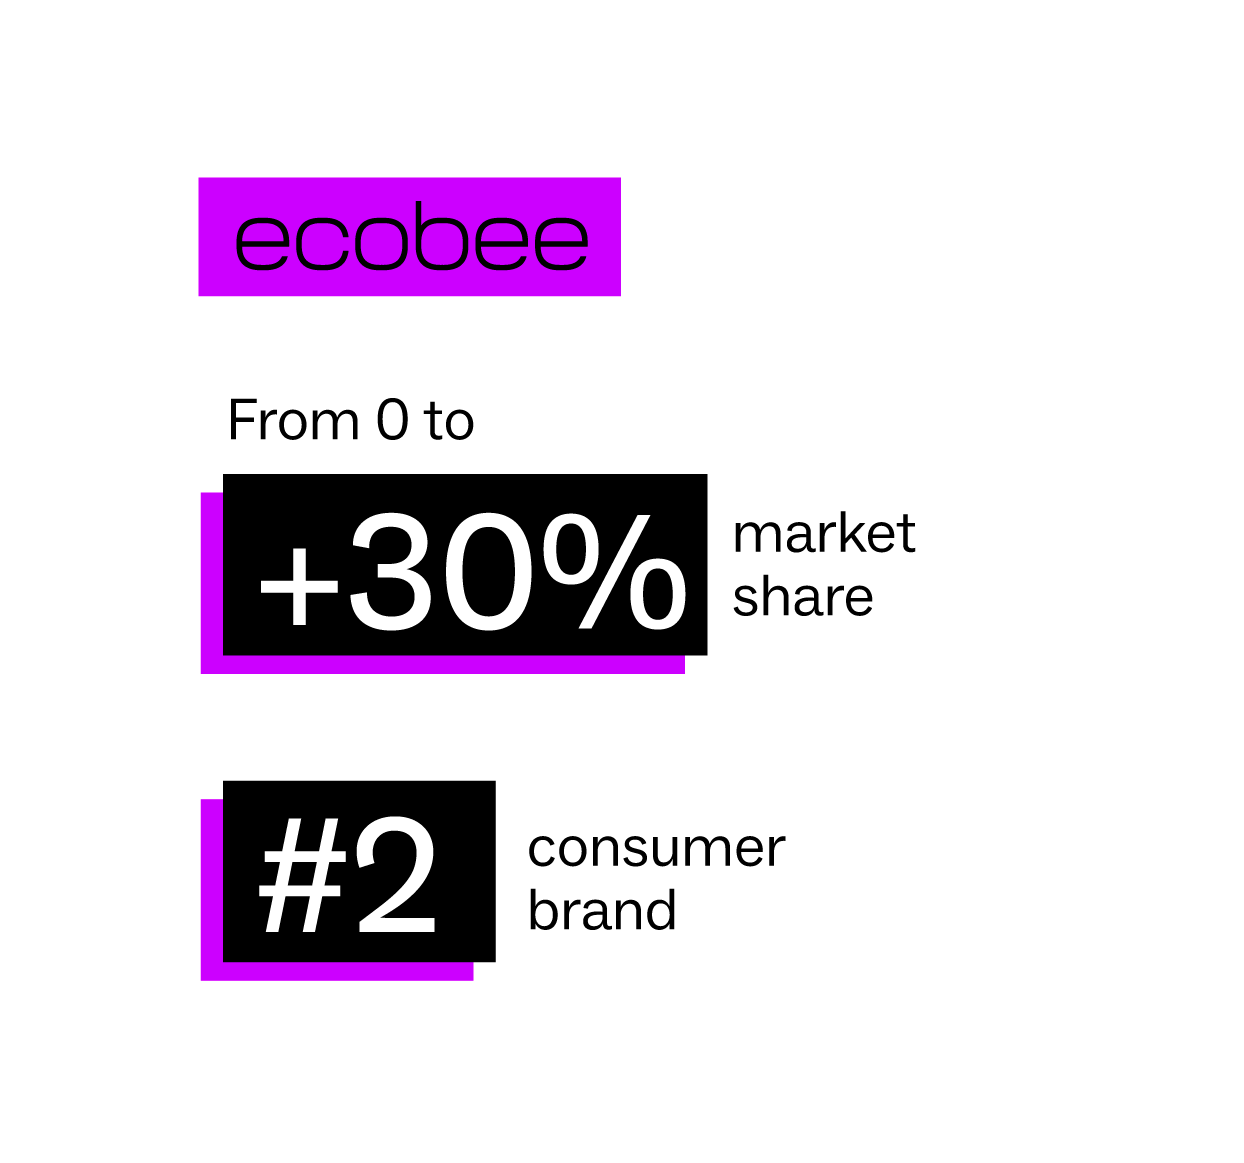 ecobee From 0 to 30% market share and #2 consumer brand